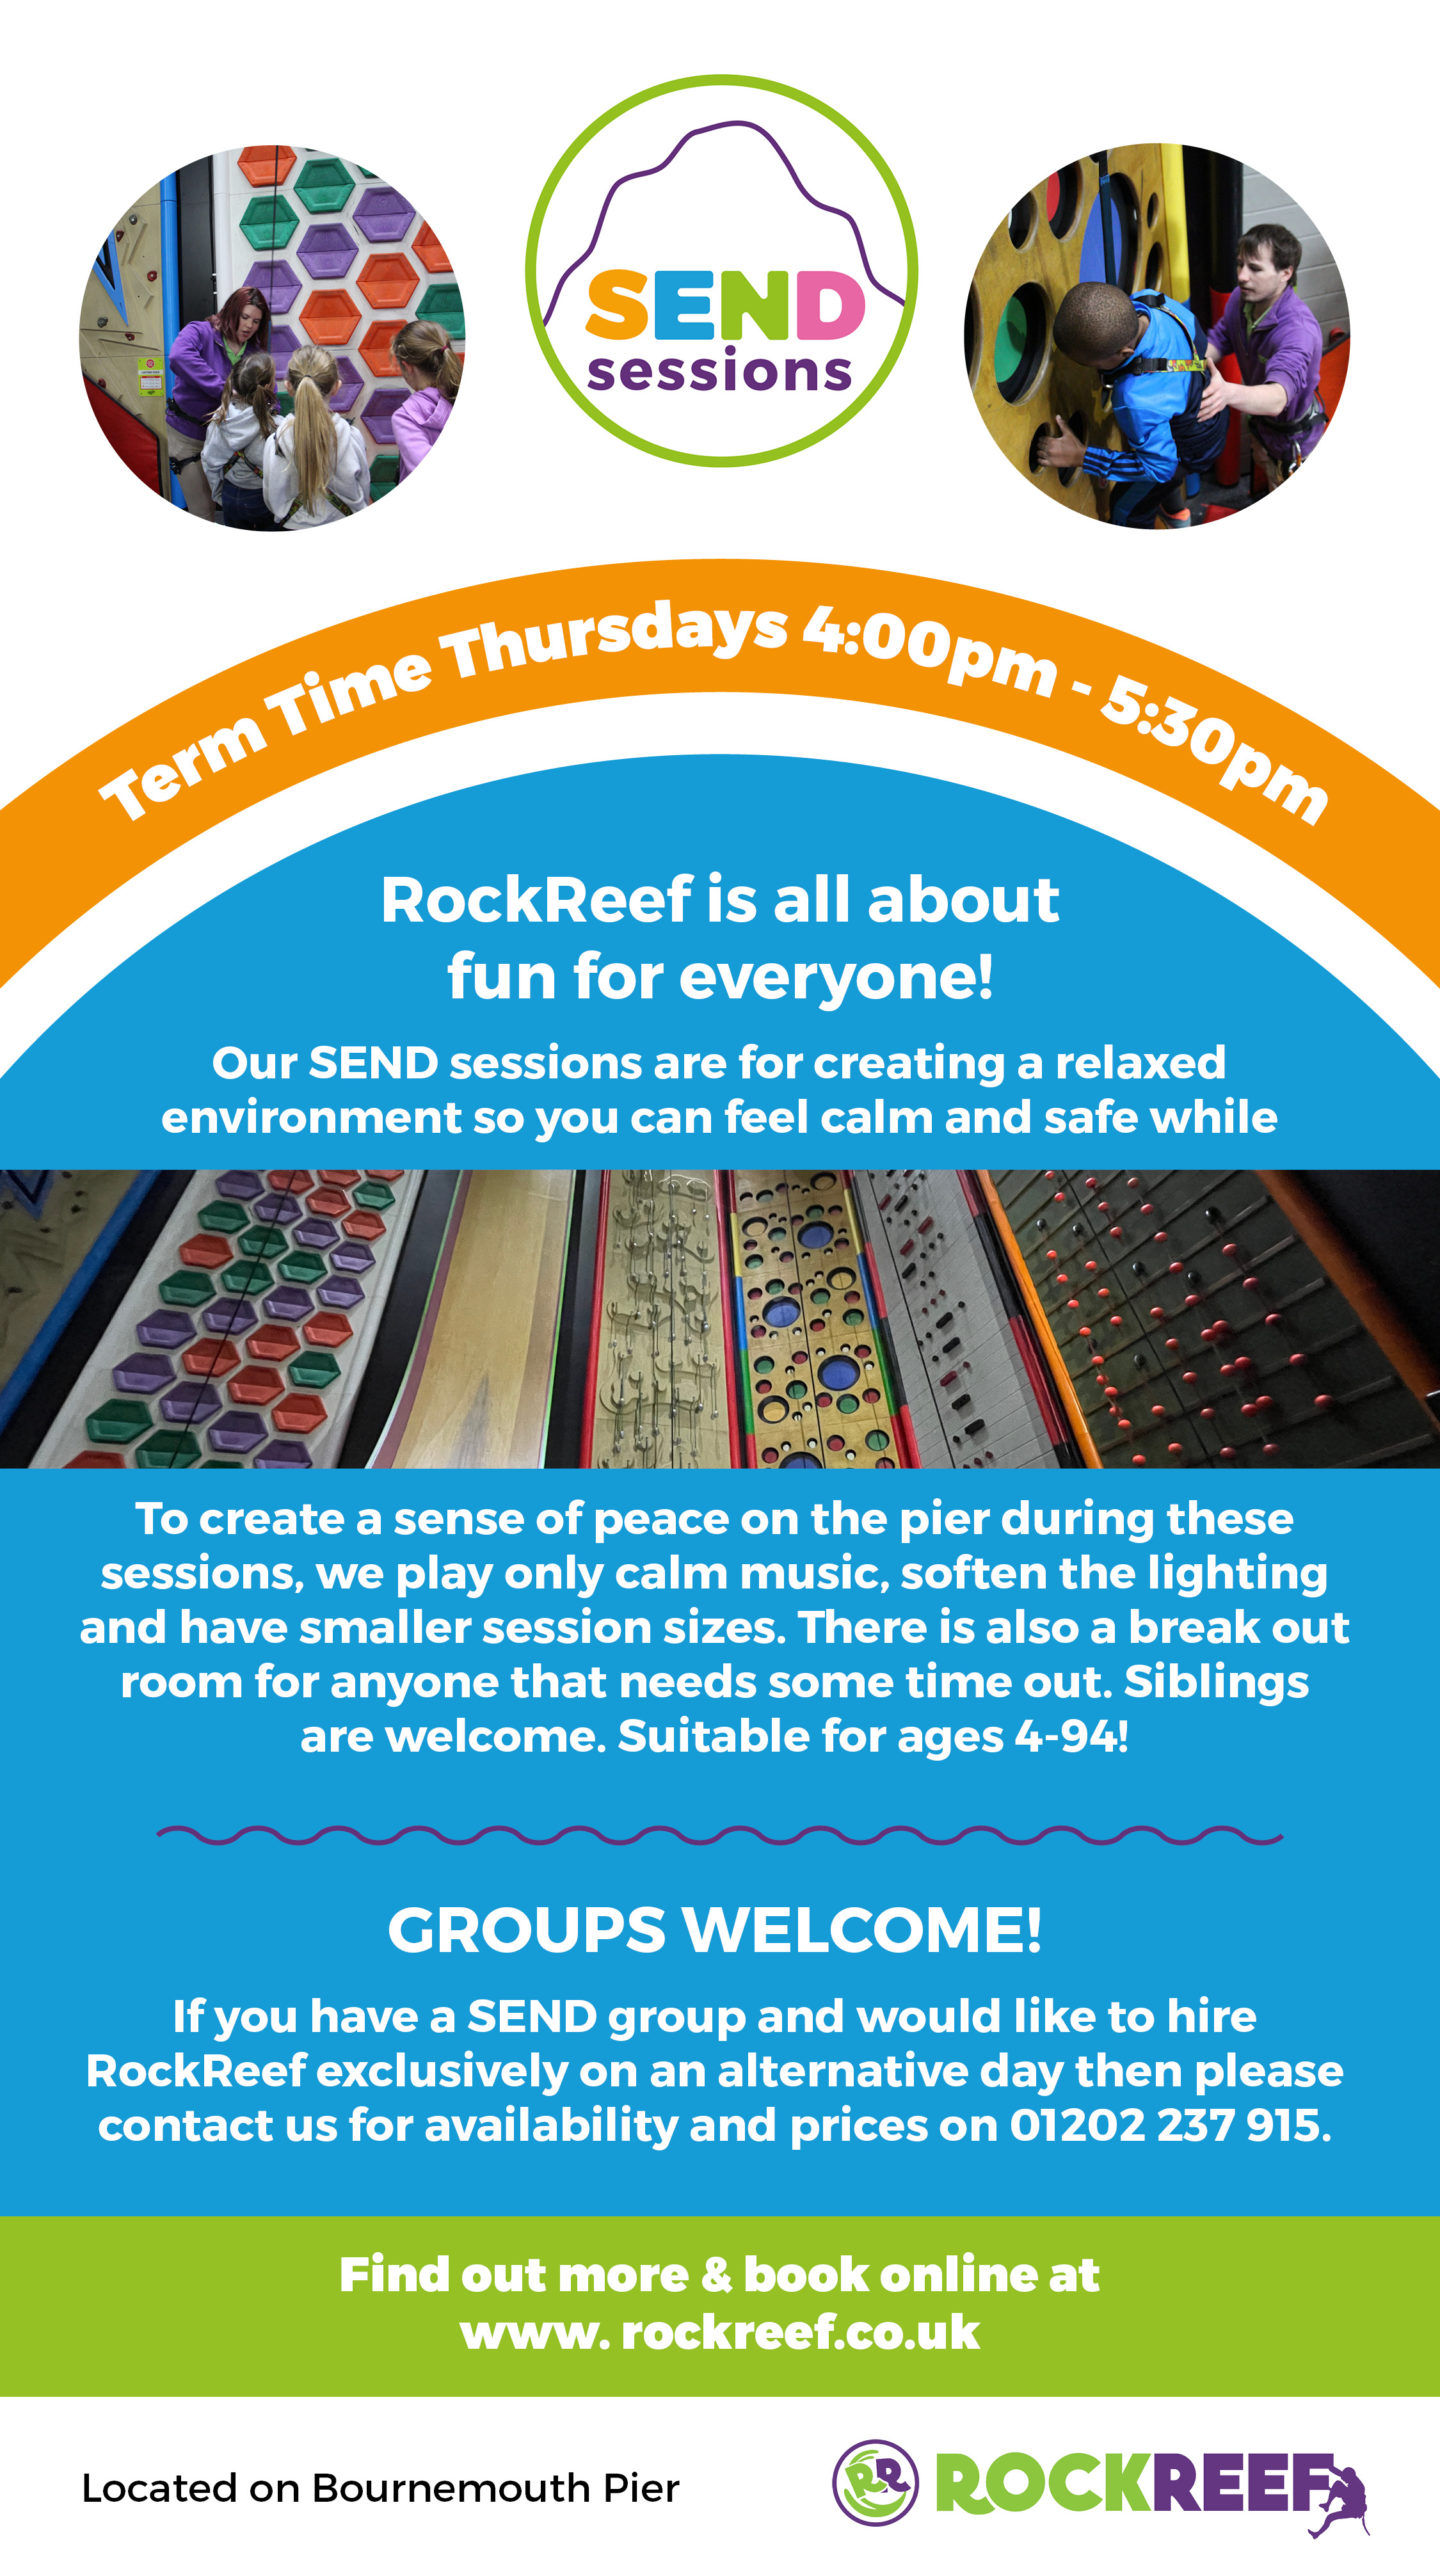 Fun climbing for all with RockReef’s New SEND Session!